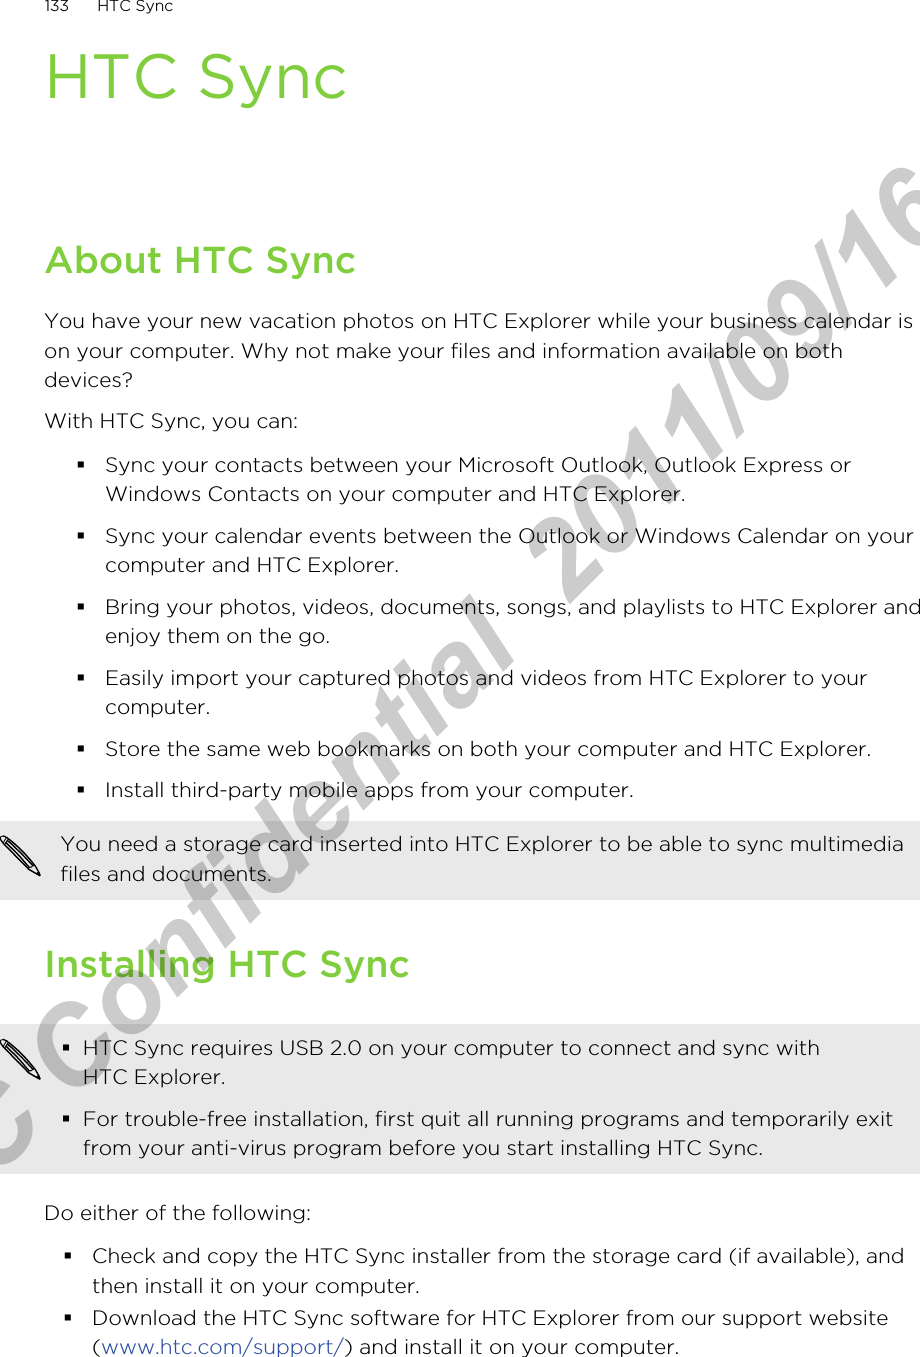 HTC SyncAbout HTC SyncYou have your new vacation photos on HTC Explorer while your business calendar ison your computer. Why not make your files and information available on bothdevices?With HTC Sync, you can:§Sync your contacts between your Microsoft Outlook, Outlook Express orWindows Contacts on your computer and HTC Explorer.§Sync your calendar events between the Outlook or Windows Calendar on yourcomputer and HTC Explorer.§Bring your photos, videos, documents, songs, and playlists to HTC Explorer andenjoy them on the go.§Easily import your captured photos and videos from HTC Explorer to yourcomputer.§Store the same web bookmarks on both your computer and HTC Explorer.§Install third-party mobile apps from your computer.You need a storage card inserted into HTC Explorer to be able to sync multimediafiles and documents.Installing HTC Sync§HTC Sync requires USB 2.0 on your computer to connect and sync withHTC Explorer.§For trouble-free installation, first quit all running programs and temporarily exitfrom your anti-virus program before you start installing HTC Sync.Do either of the following:§Check and copy the HTC Sync installer from the storage card (if available), andthen install it on your computer.§Download the HTC Sync software for HTC Explorer from our support website(www.htc.com/support/) and install it on your computer.133 HTC SyncHTC Confidential  2011/09/16 